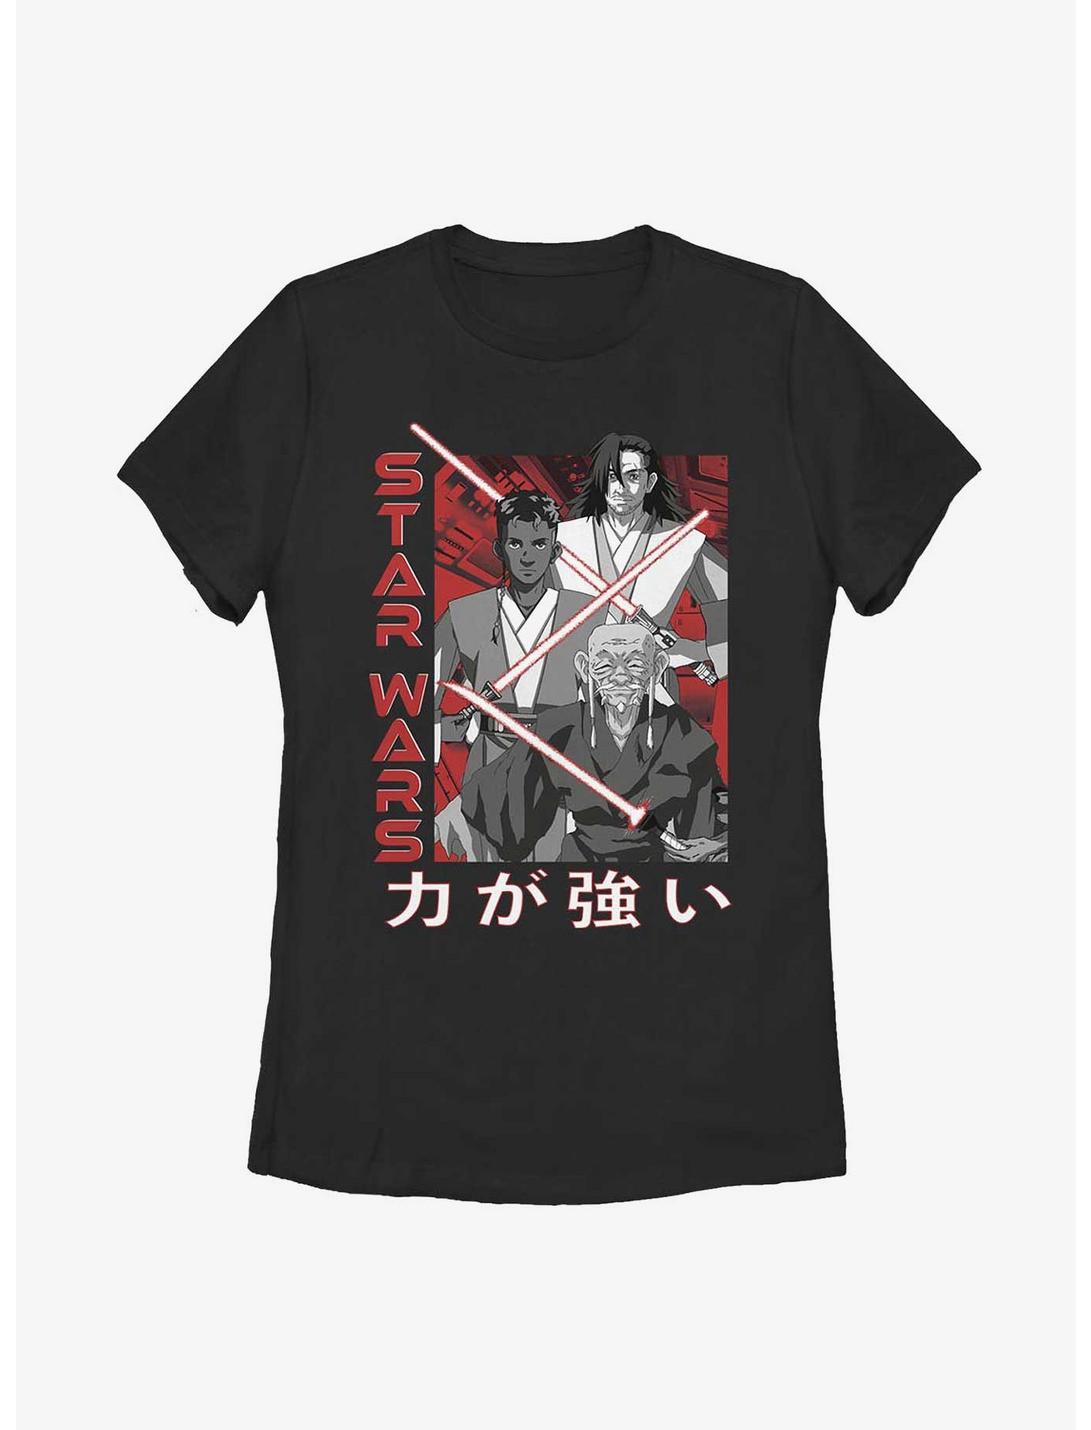 Star Wars: Visions Weapons Anime Womens T-Shirt, BLACK, hi-res